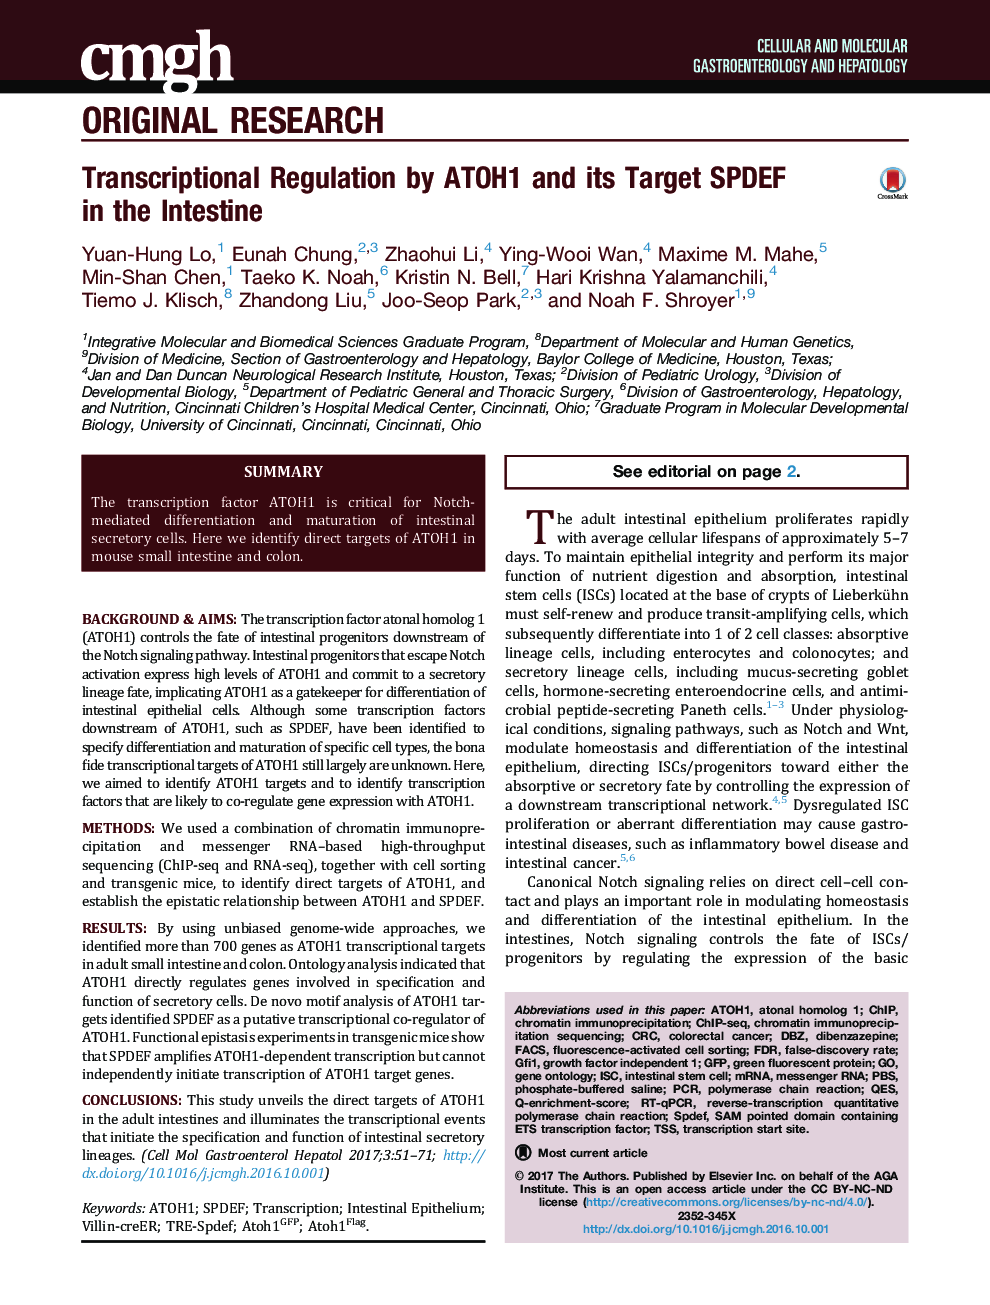 Transcriptional Regulation by ATOH1 and its Target SPDEF inÂ theÂ Intestine